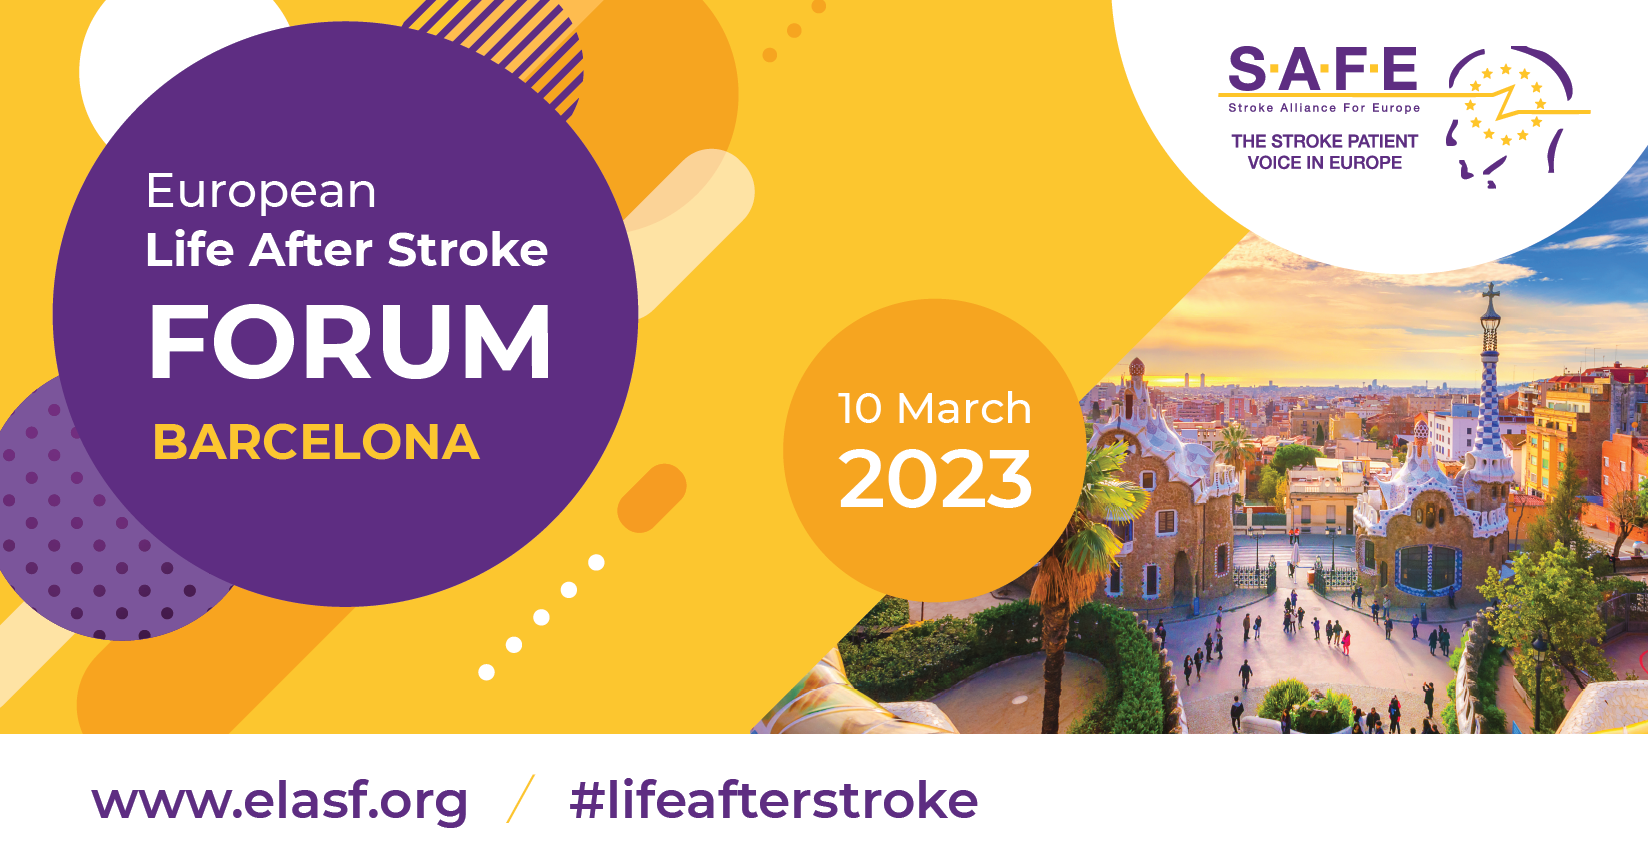 Early bird rates for the European Life After Stroke Forum ends 31 December 2022